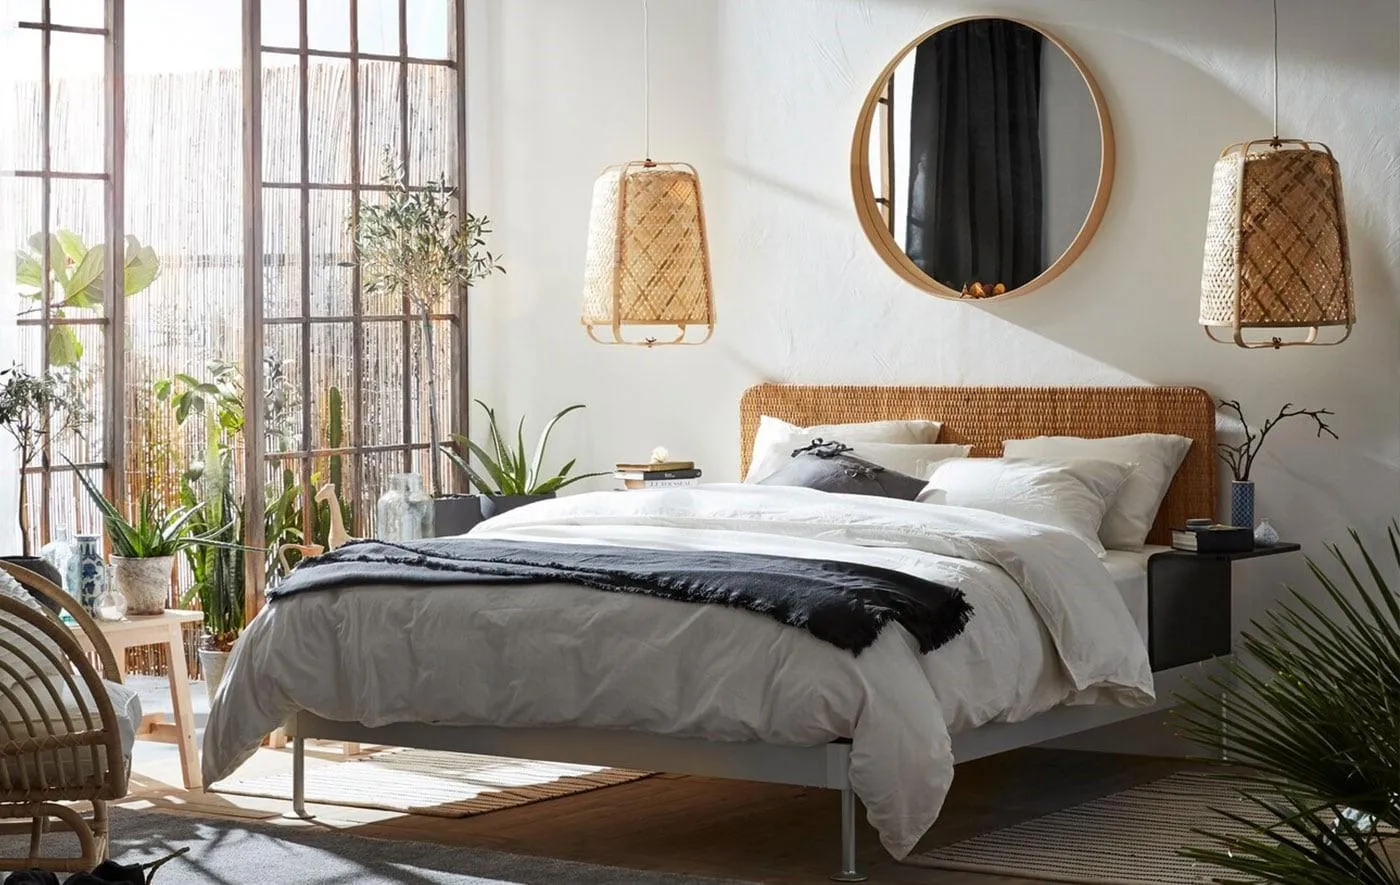 white bedroom with bed, round mirror, pendant light, indoor plants, and brown chair